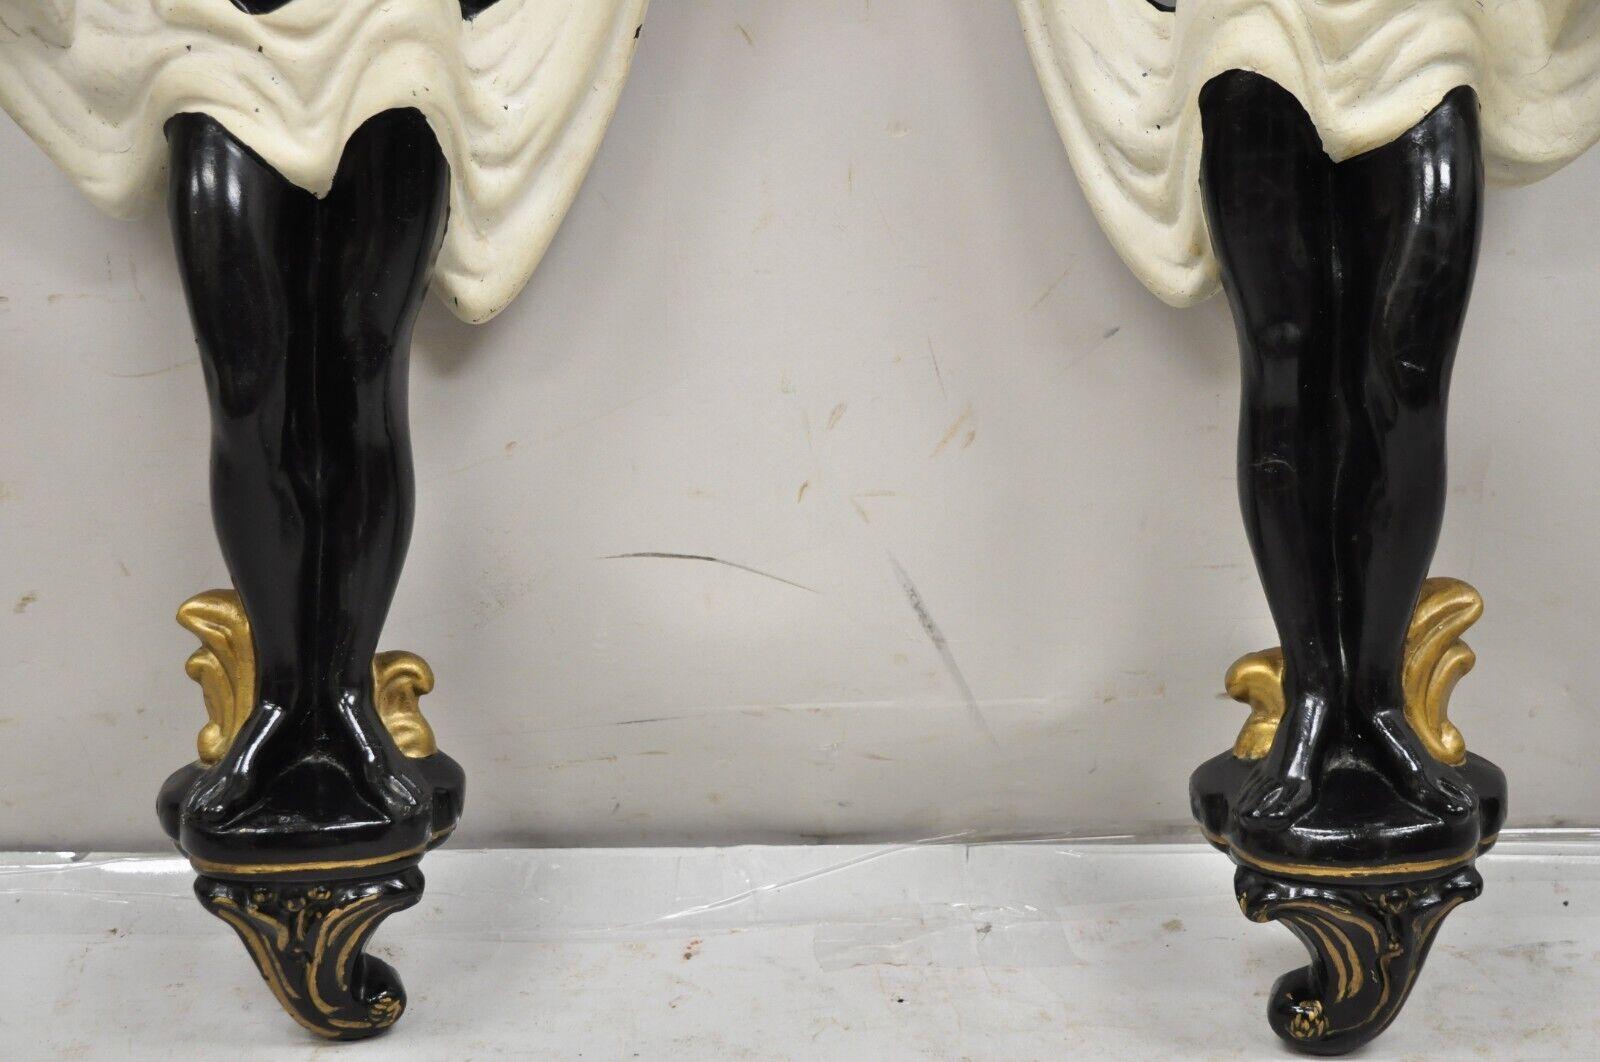 20th Century Vintage Arabian Chalkware Male Figural Wall Sconce Candlesticks - a Pair